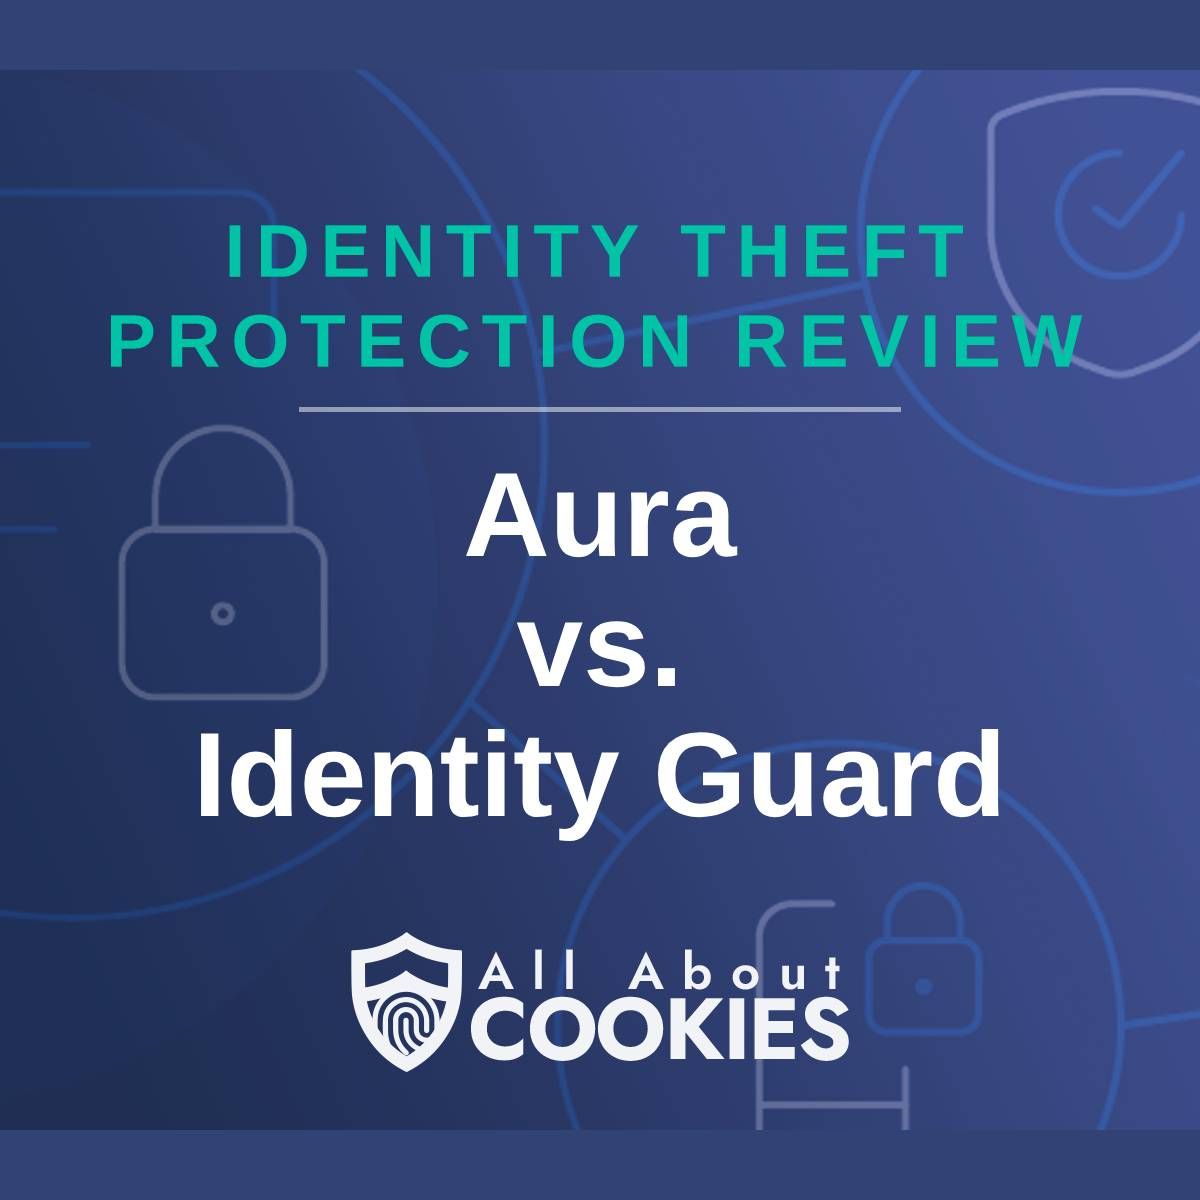 A blue background with images of locks and shields with the text &quot;Identity Theft Protection Review Aura vs. Identity Guard&quot; and the All About Cookies logo. 